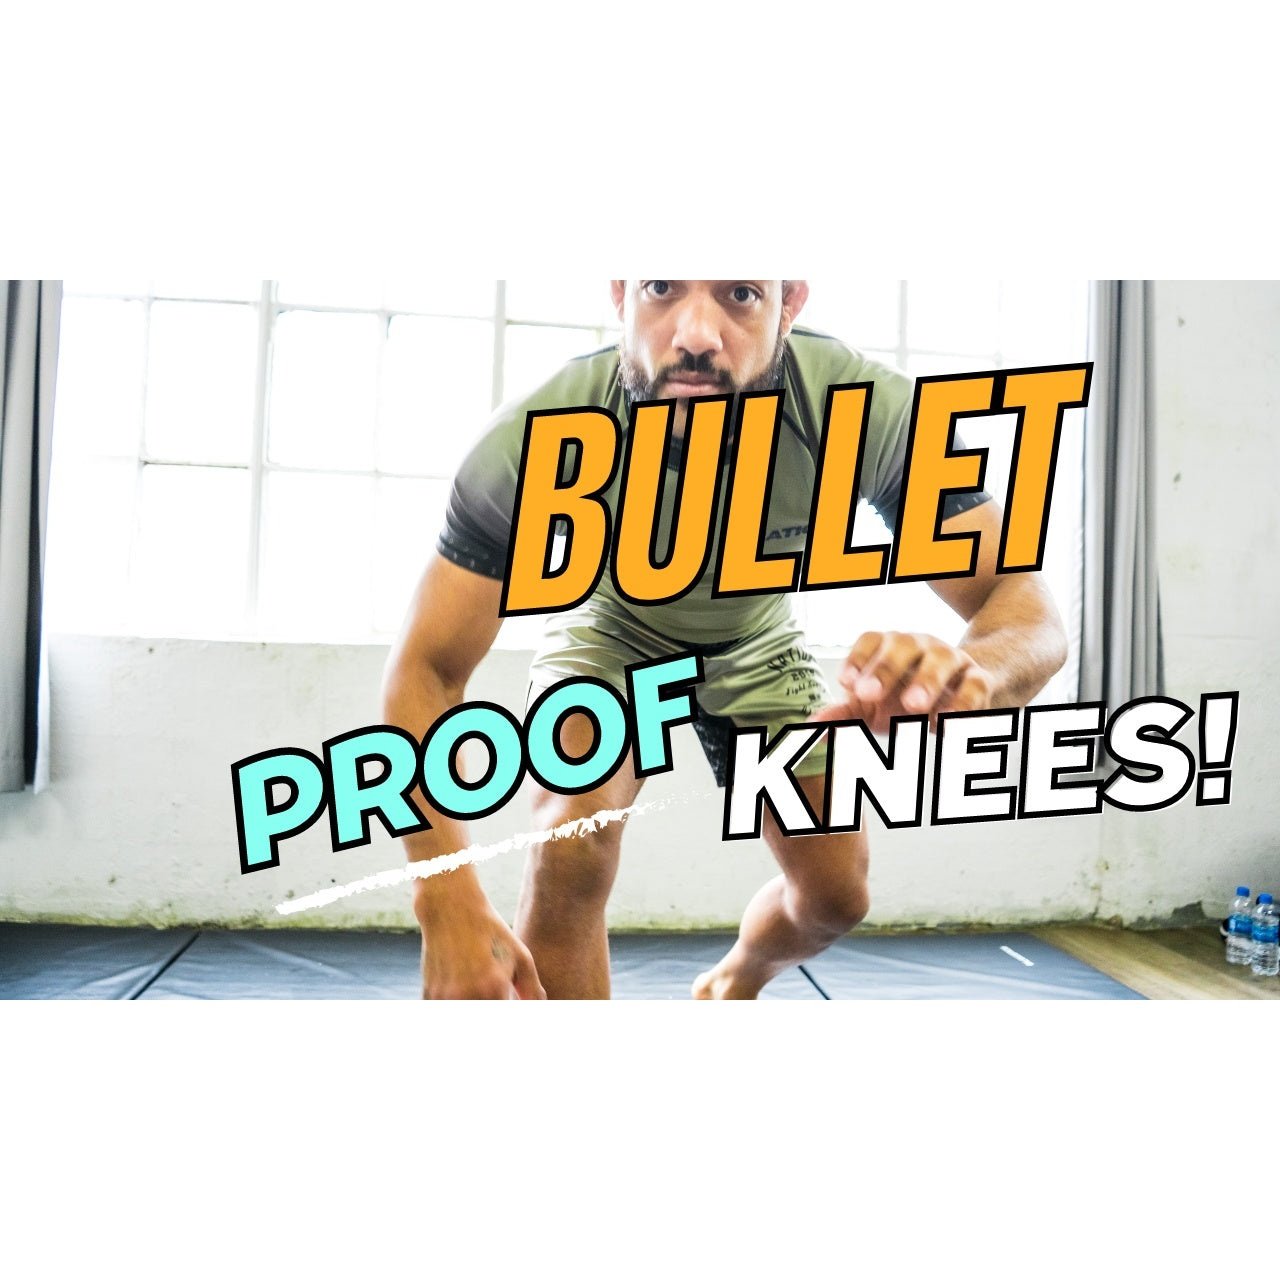 RECOVERY -YOGA4BJJ- 'BulletProof' your knees!